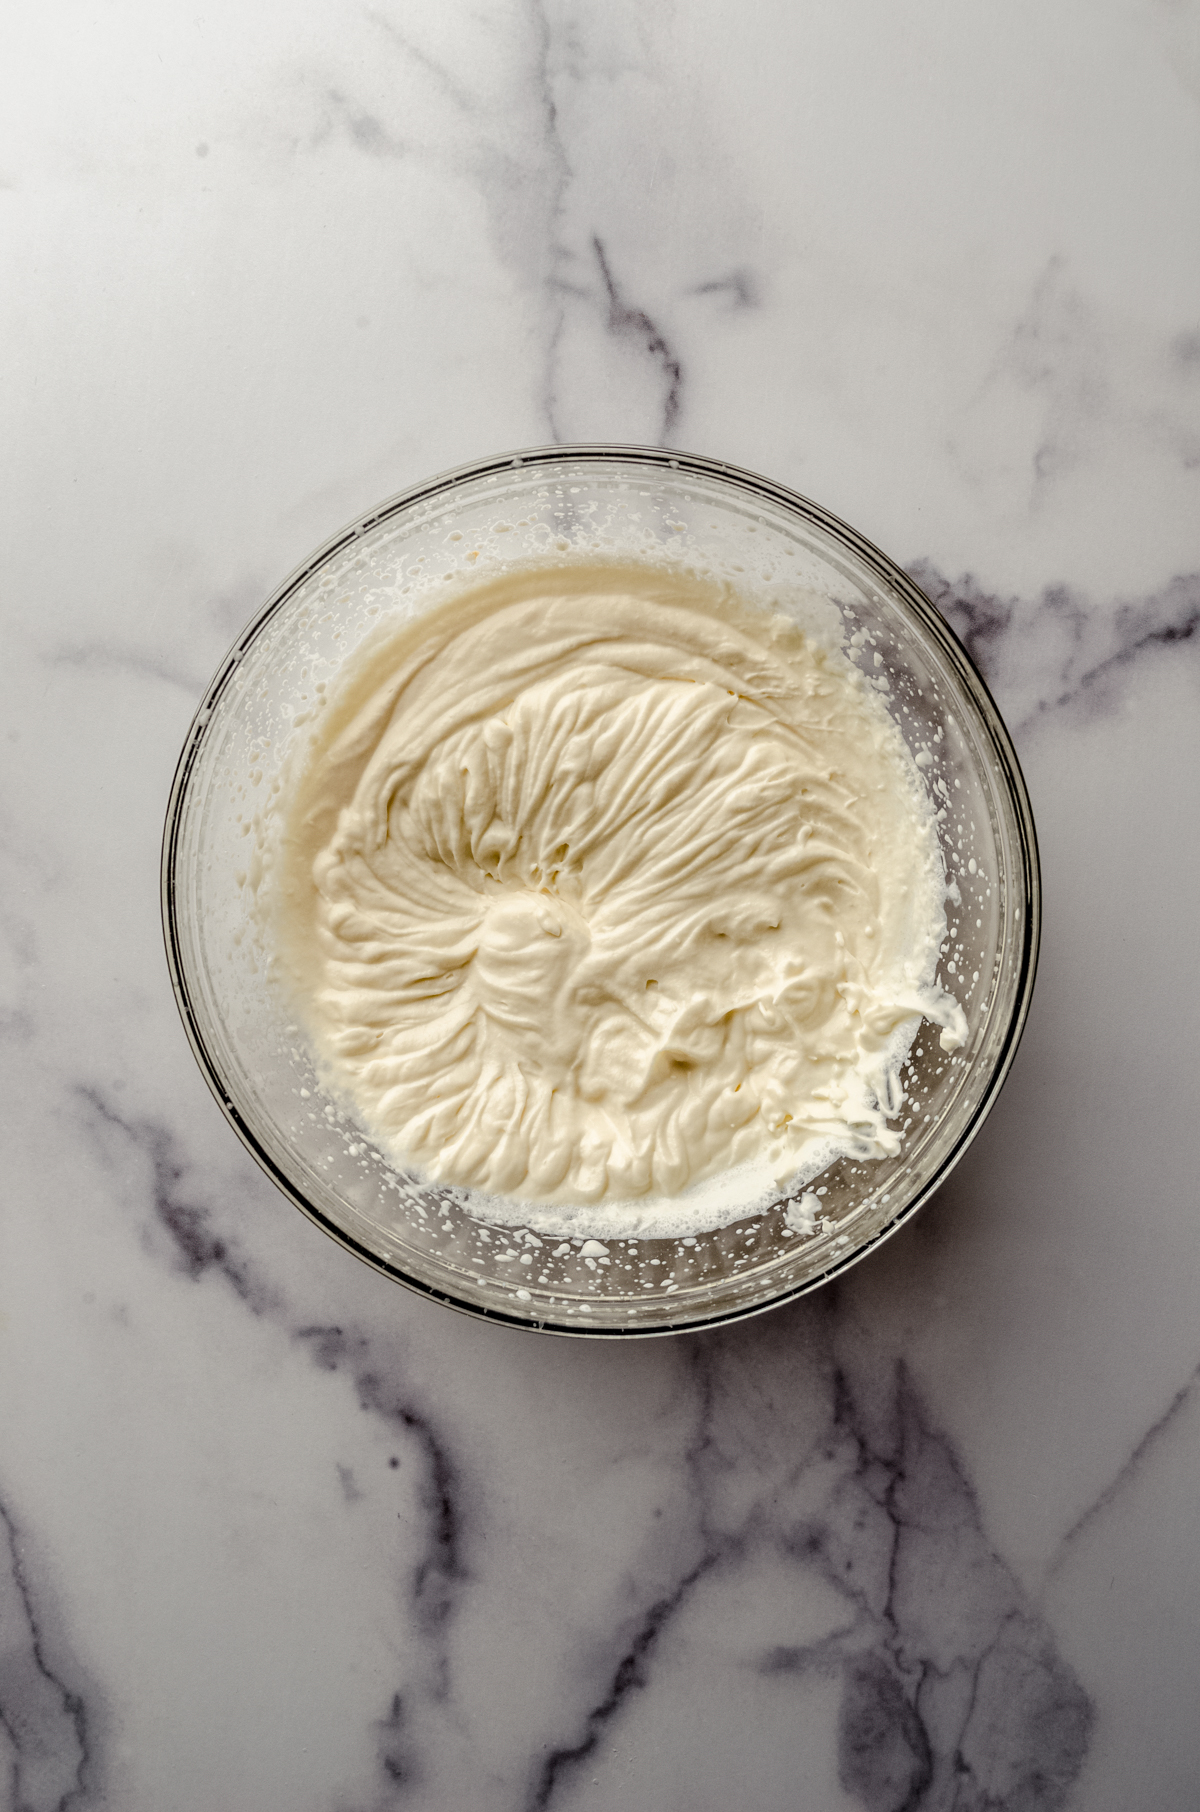 Aerial photo of a bowl of whipped cream.